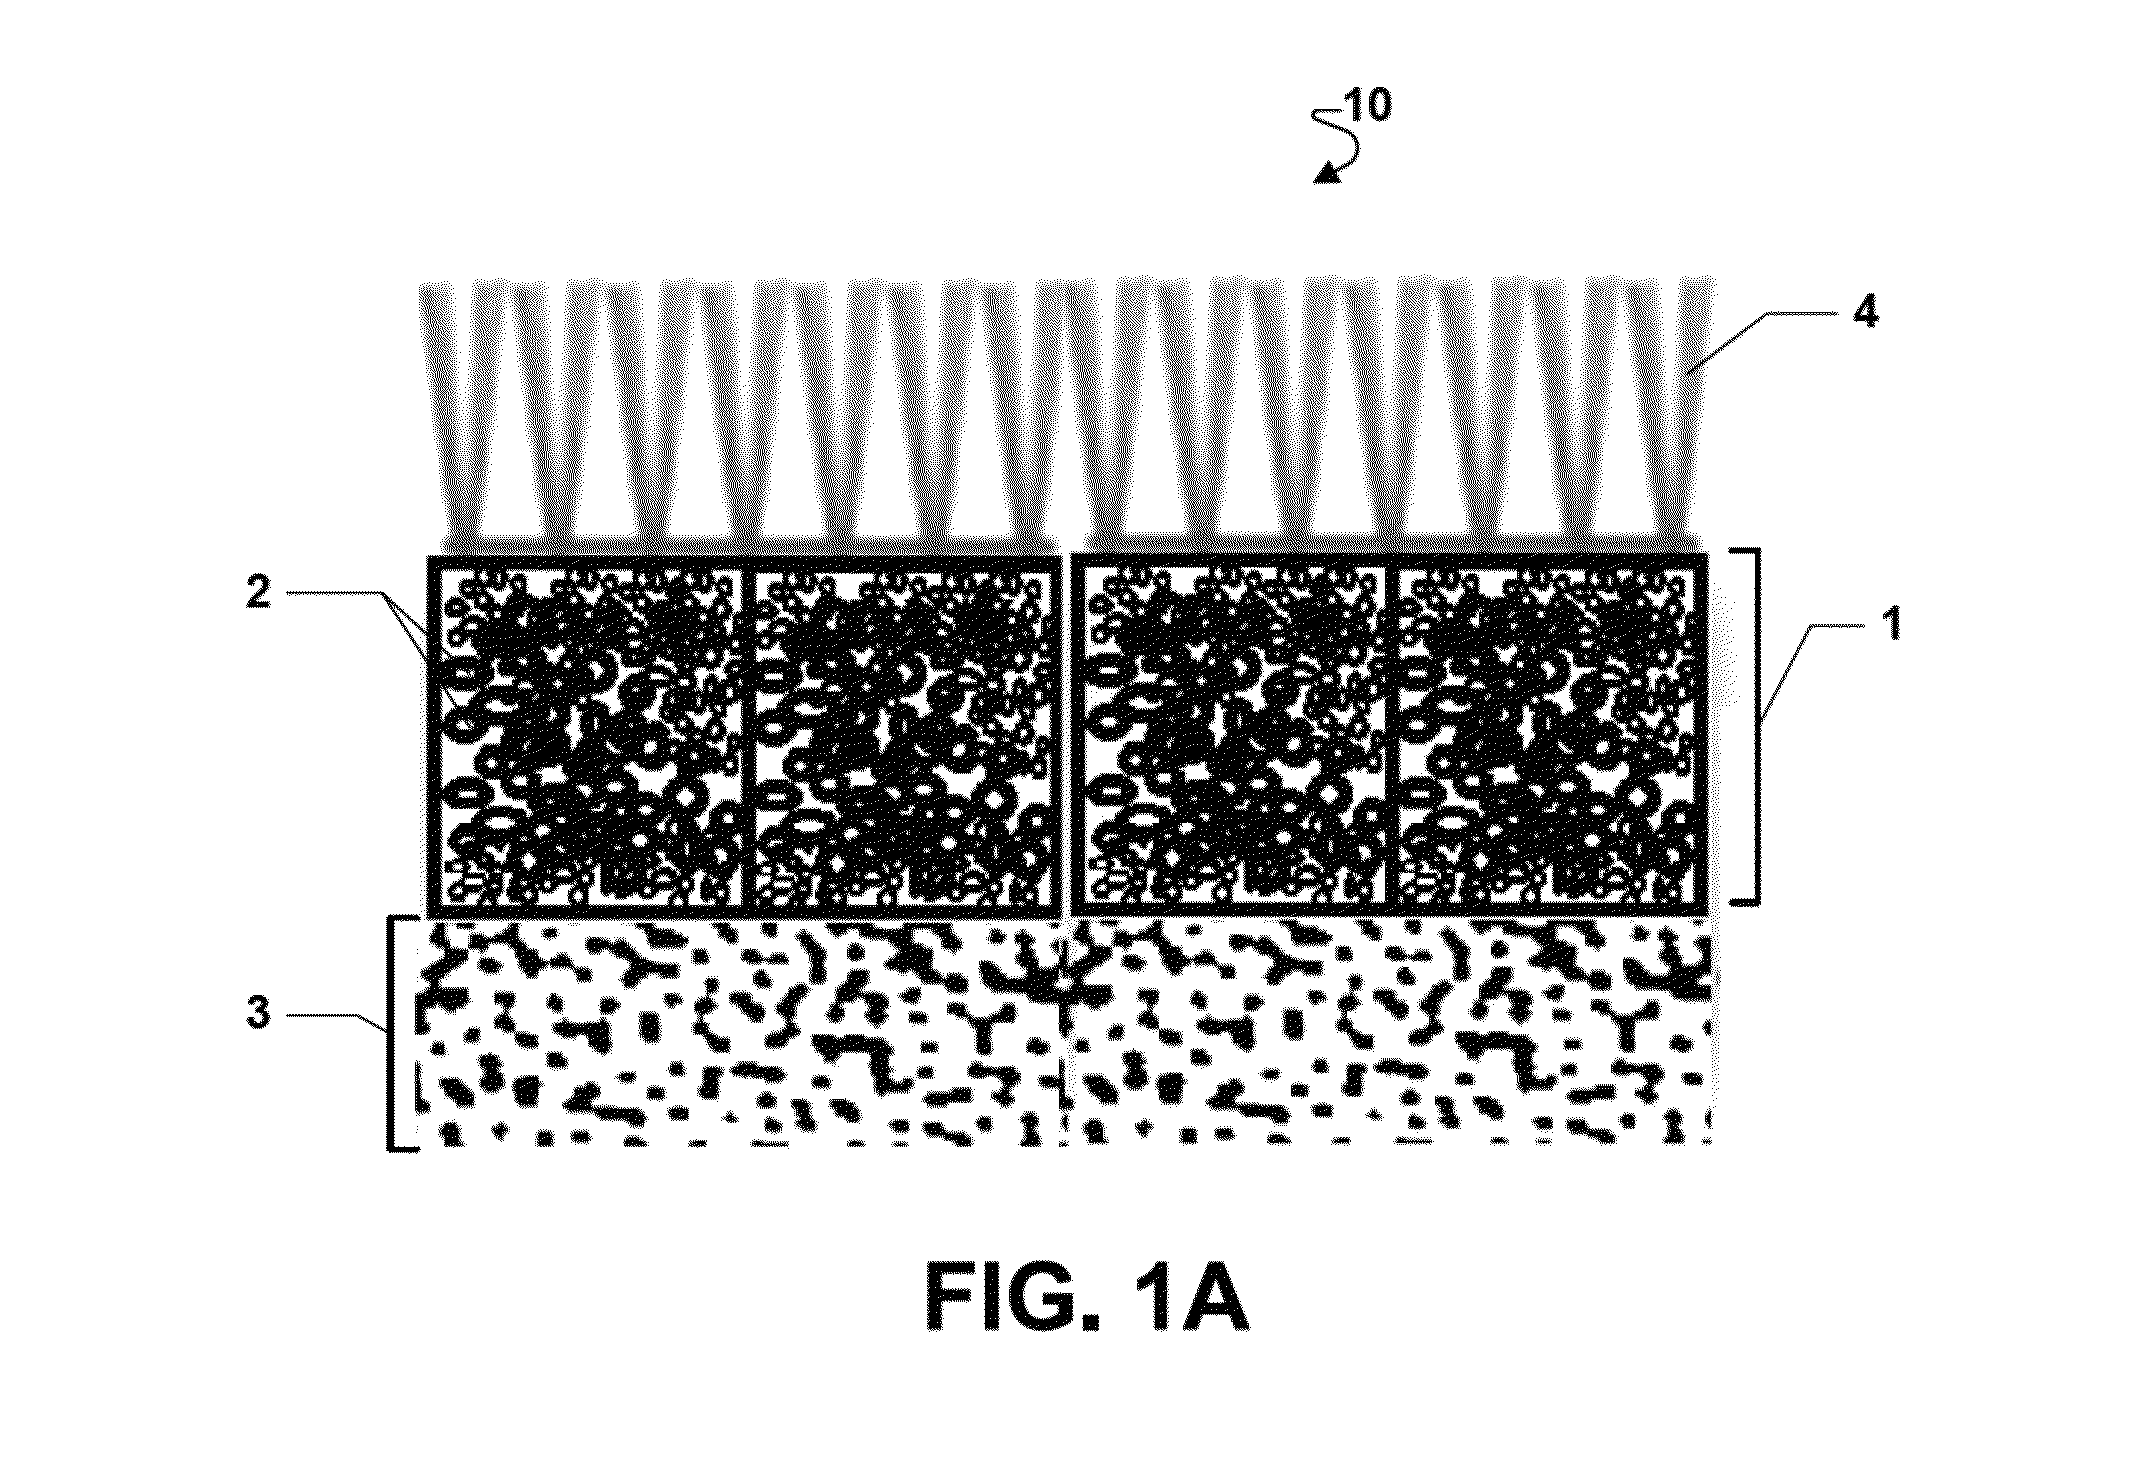 System and method for absorbing shocks impacts while providing water drainage